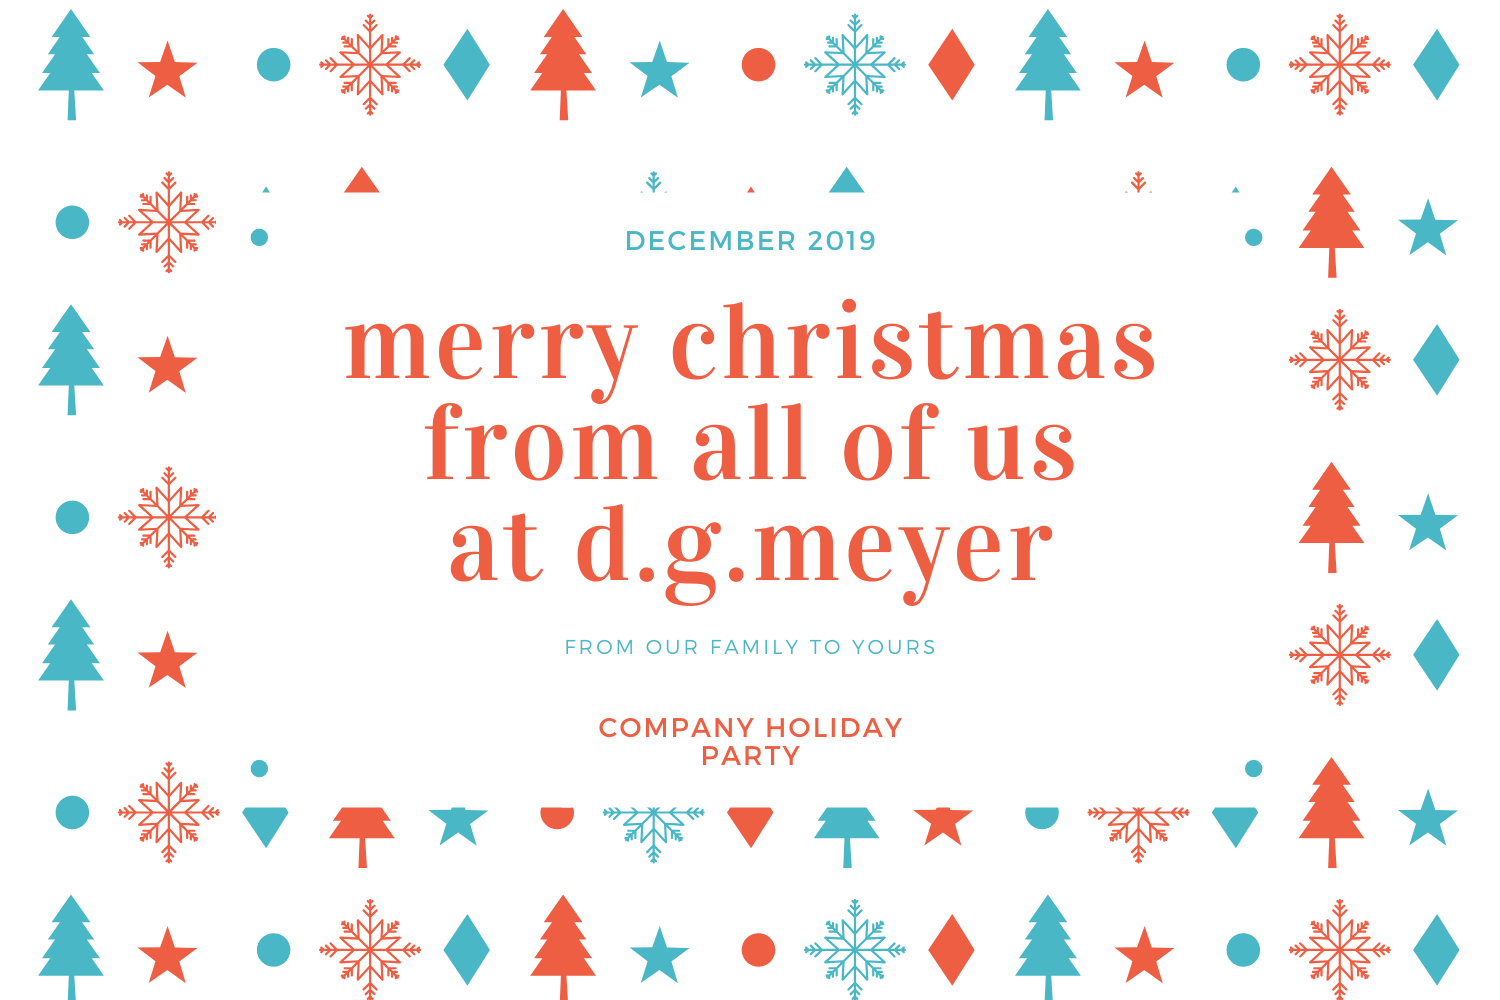 Merry Christmas from DGM